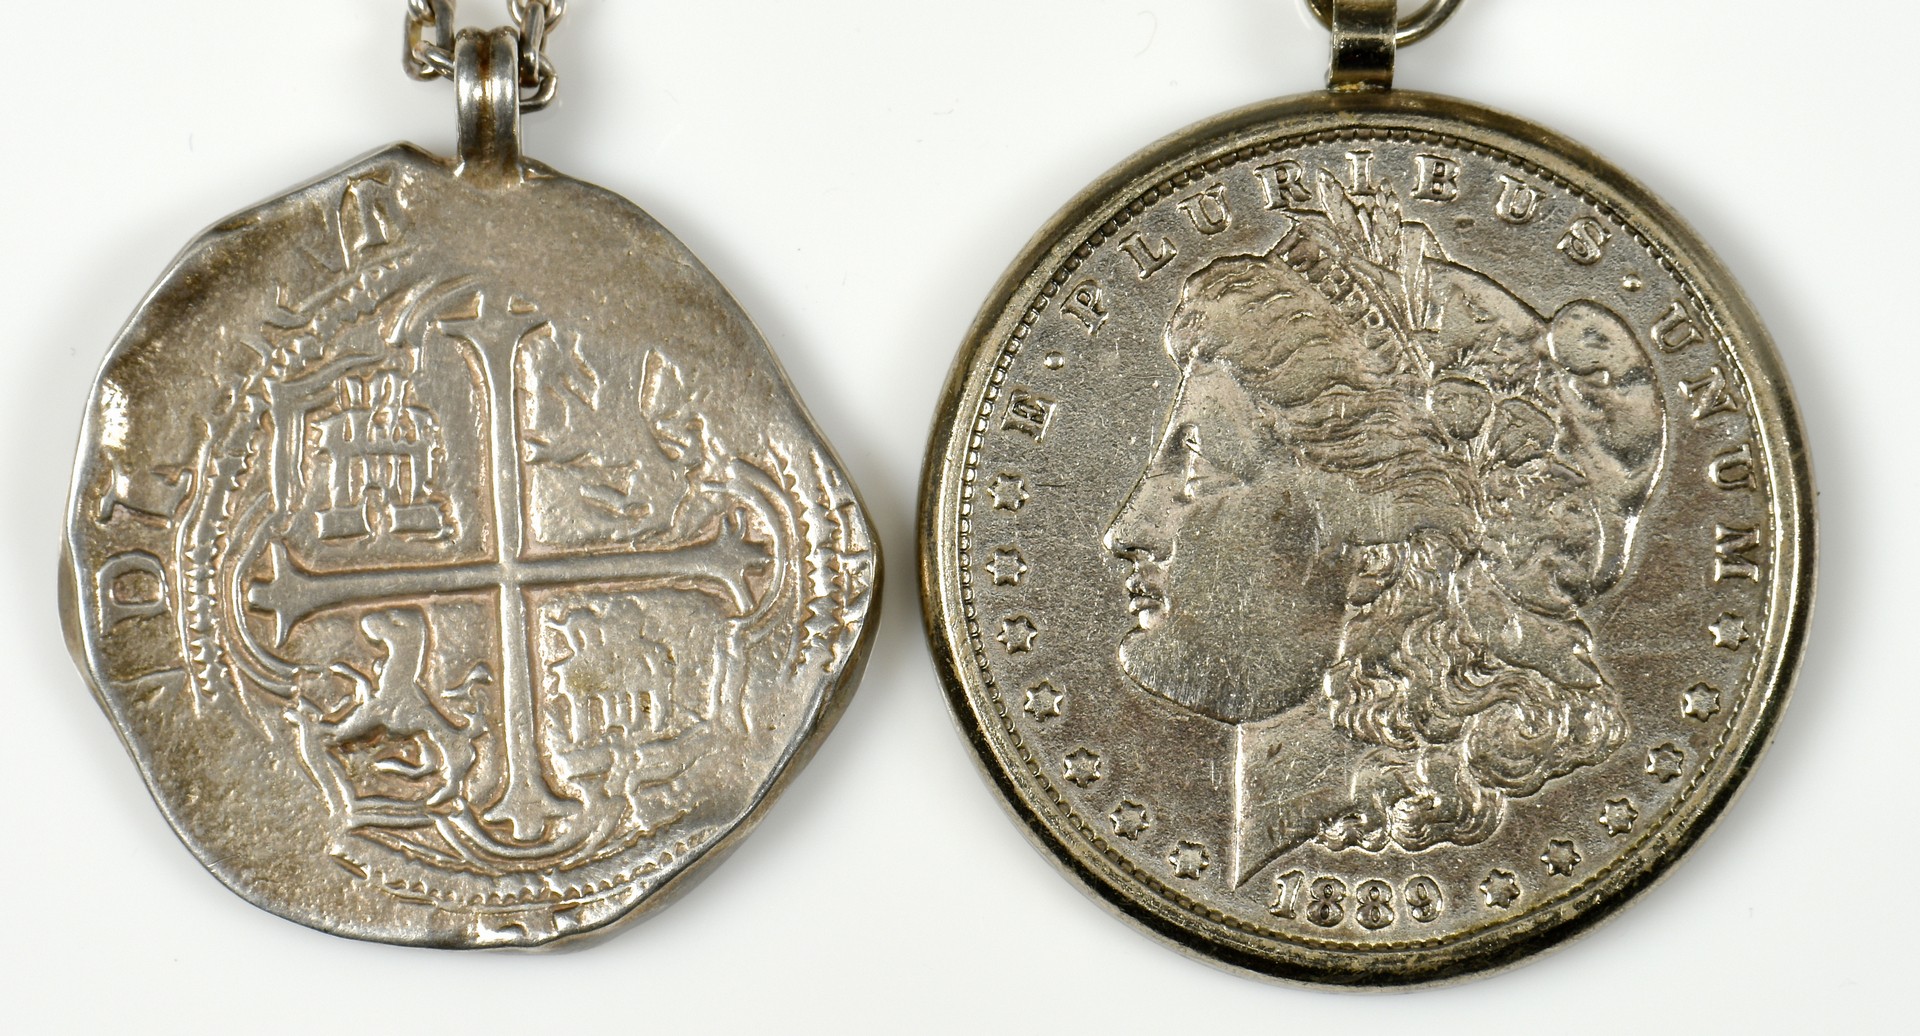 Lot 383: Tiffany Jewelry with coin items